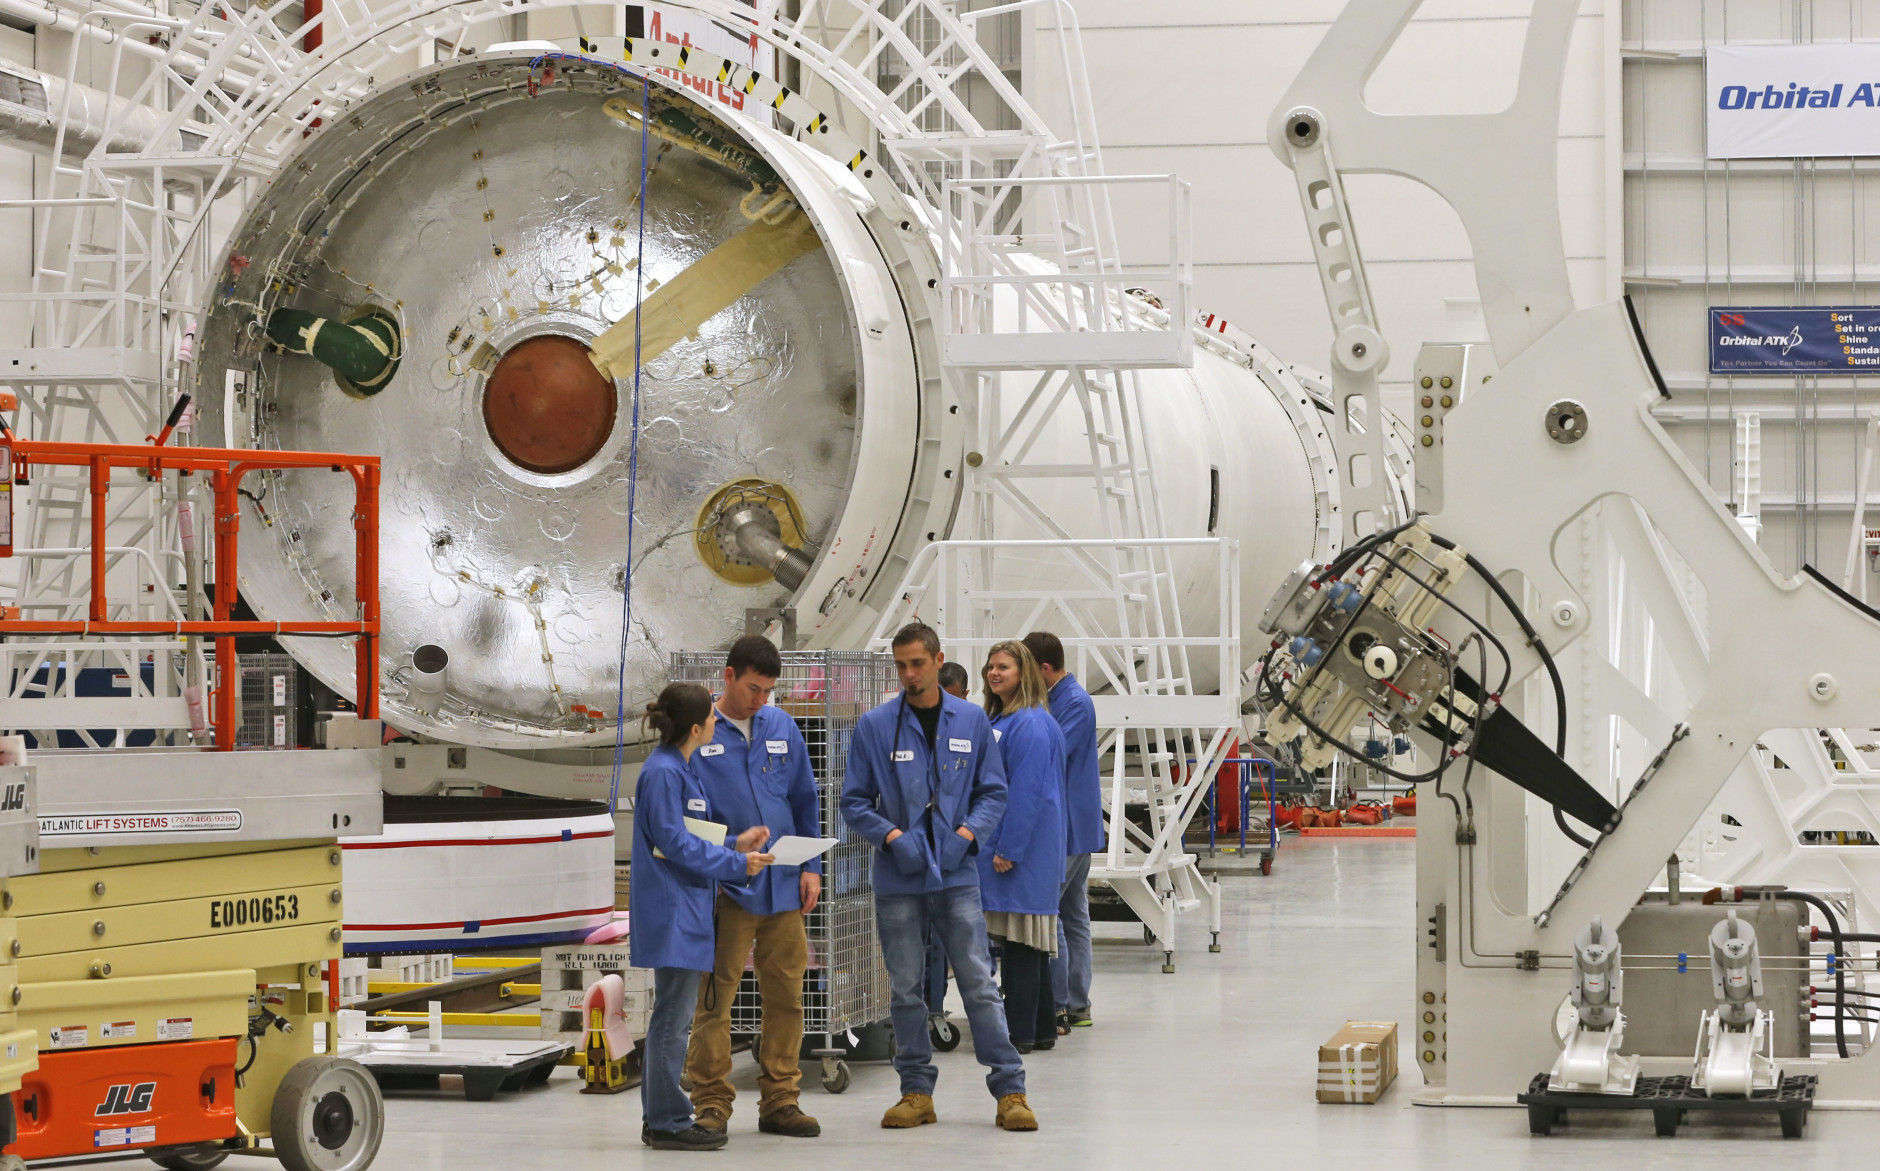 In this Dec. 17, 2015 file photo, workers look over documents in the assembly building for Antares rockets during a tour of the Mid-Atlantic Regional Spaceport at the NASA Wallops Flight Facility on Wallops Island, Va. Orbital ATK turned to the heavens for naming its Antares rocket after the superbright star. (AP Photo/Steve Helber, File)